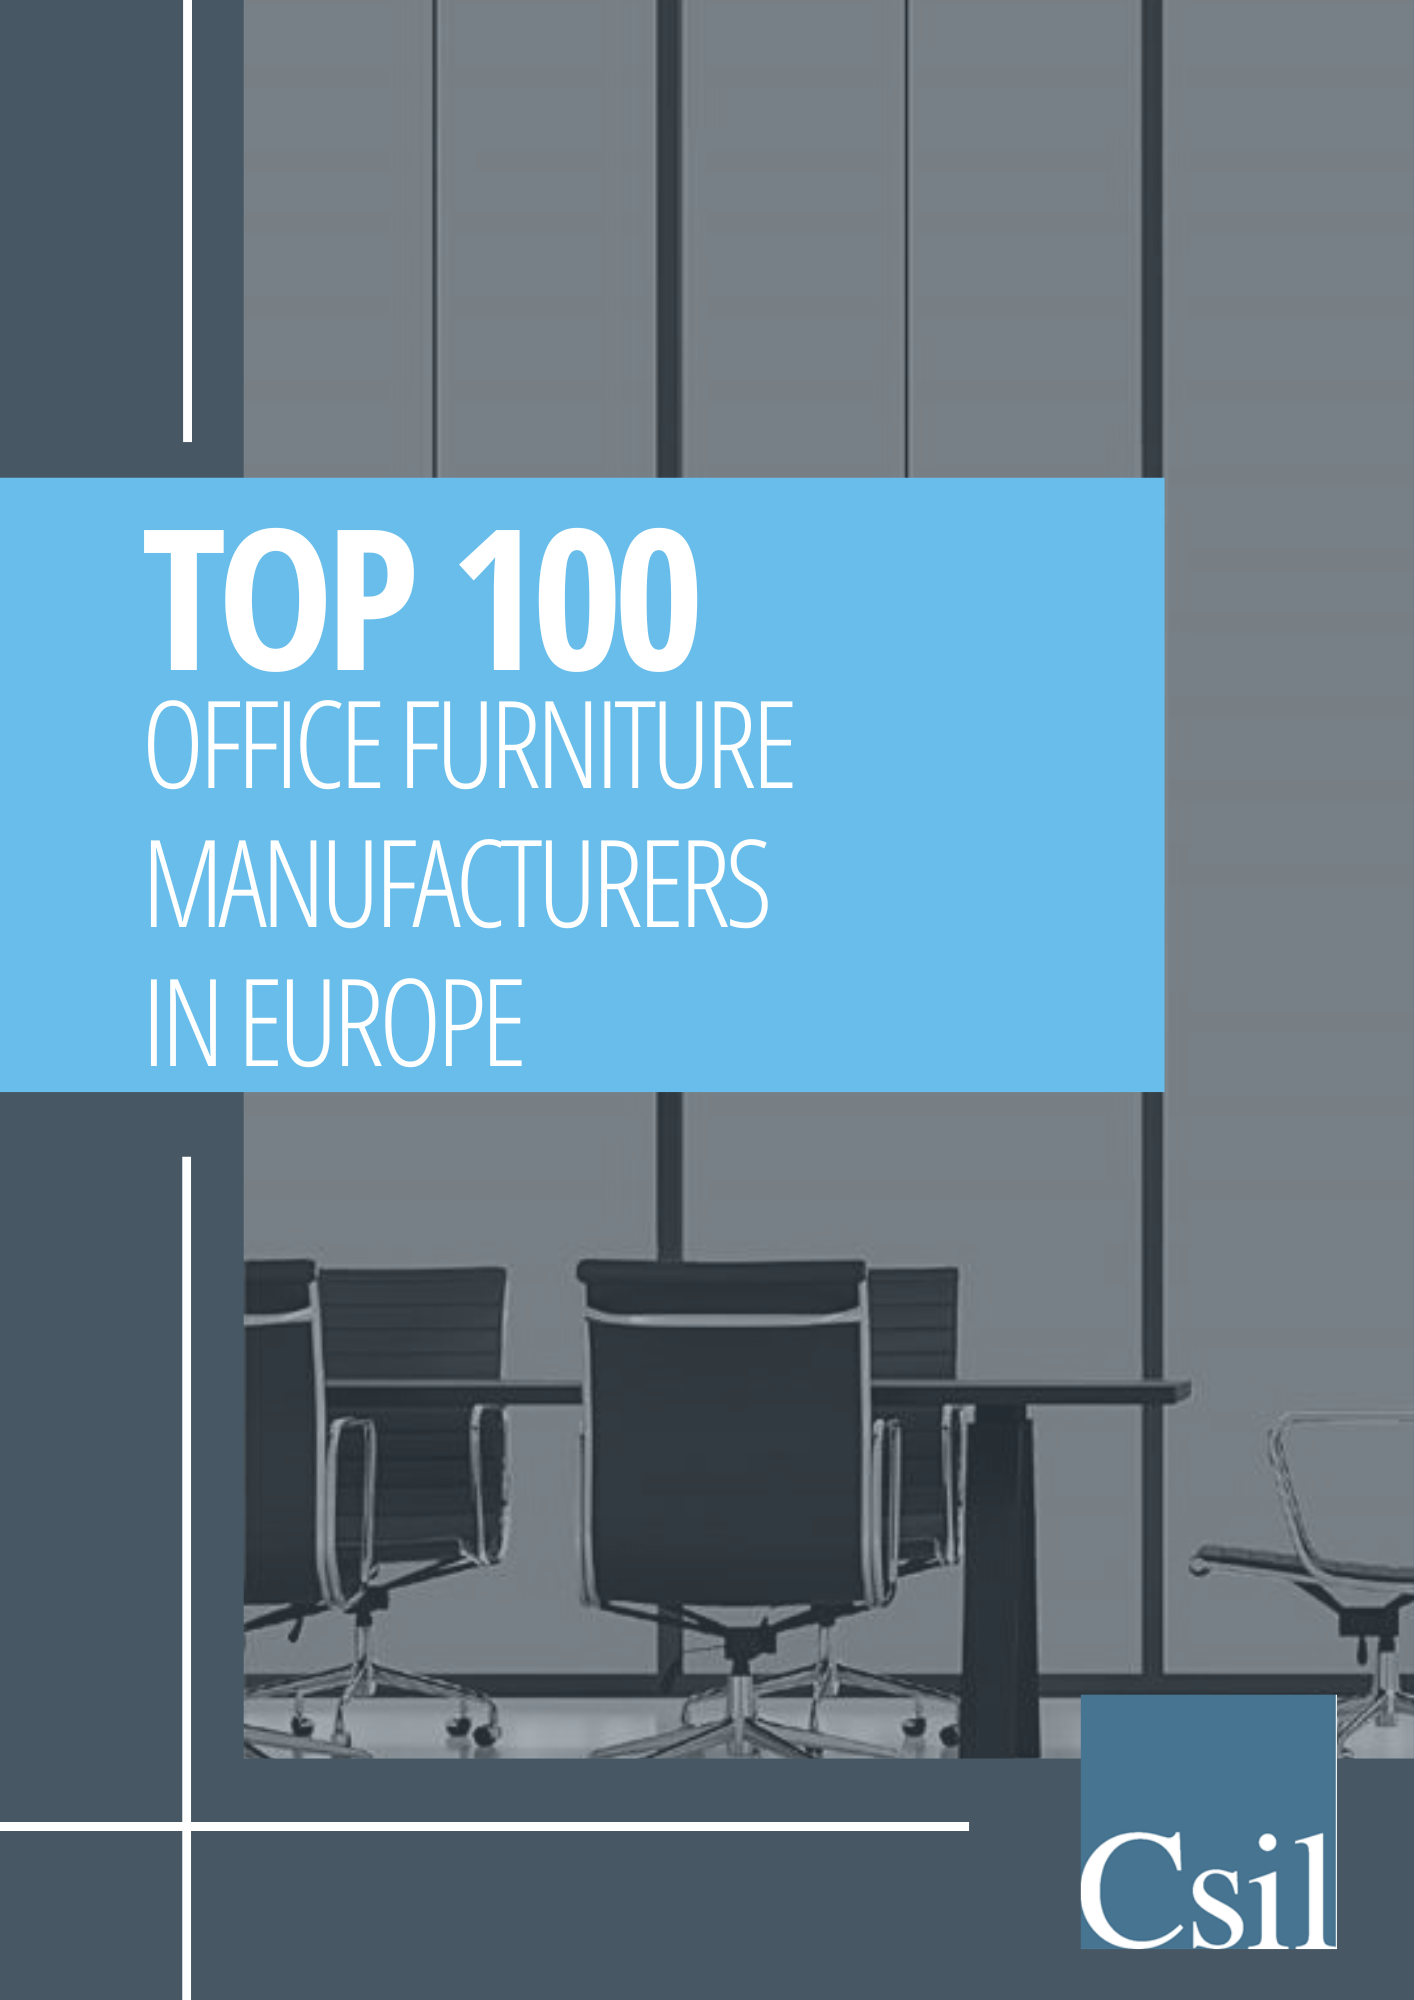 Top office furniture manufacturers in Europe